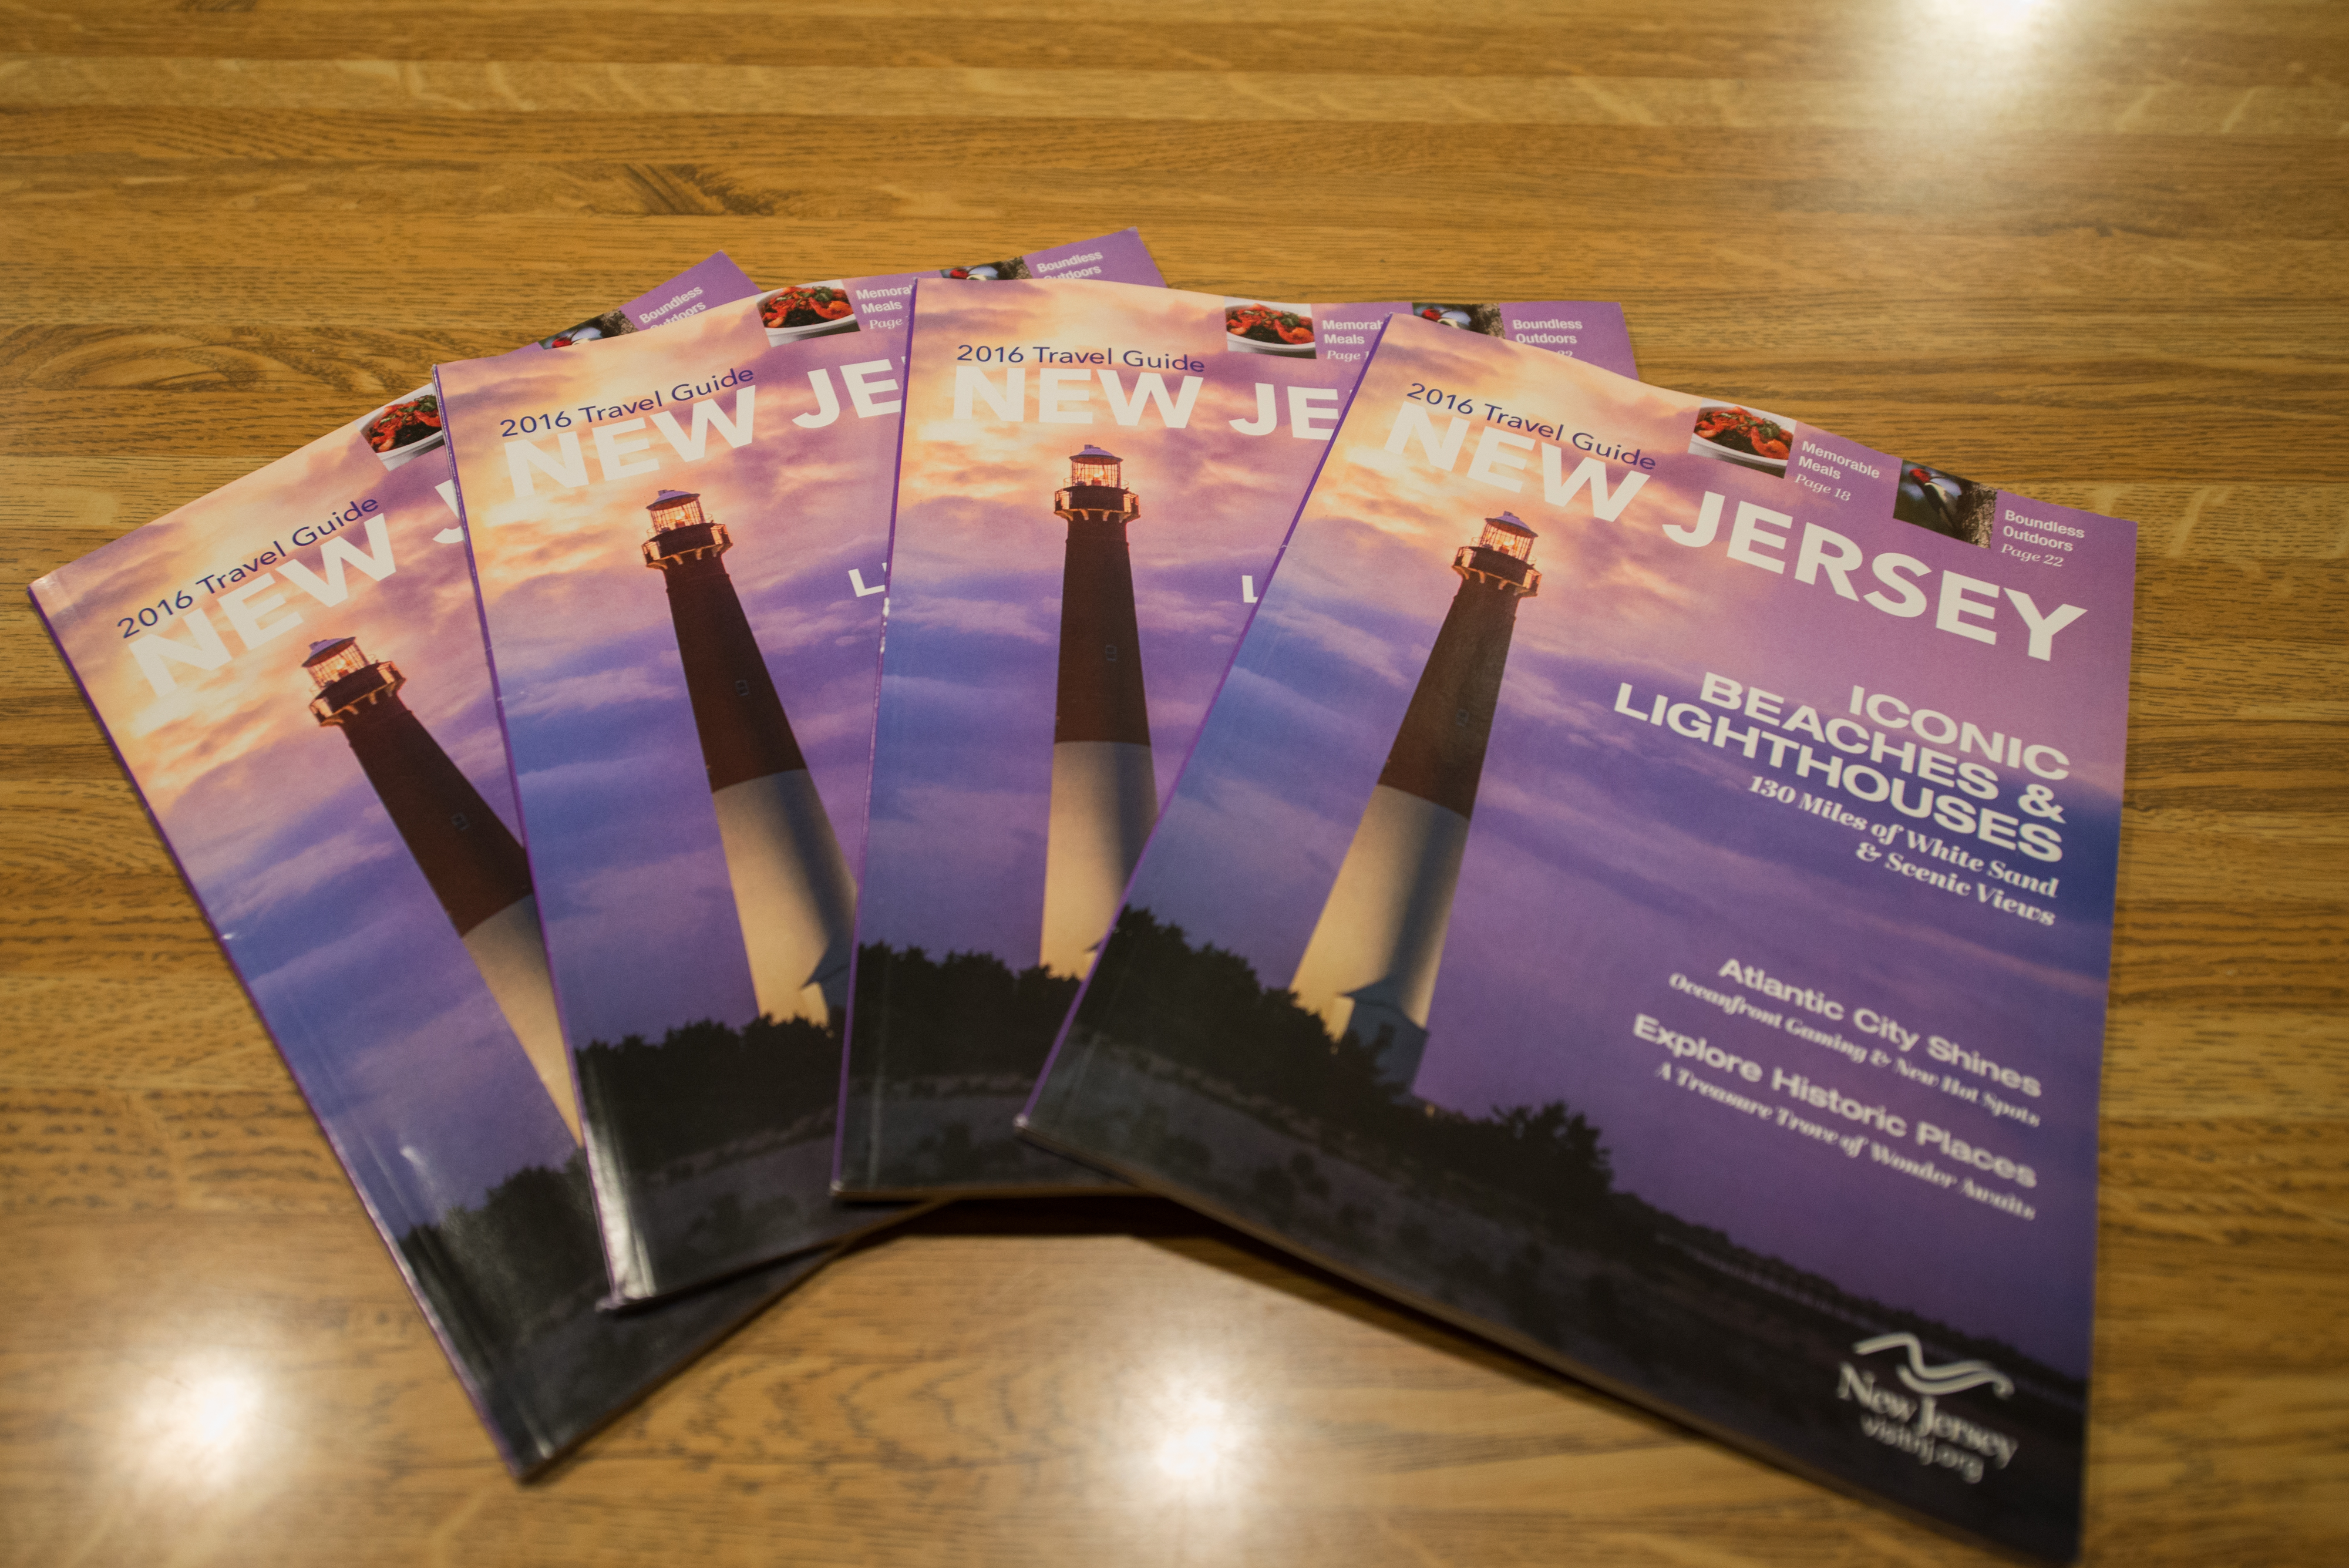 New Jersey Tourism and Travel Guide 2016 Mike Ver Sprill